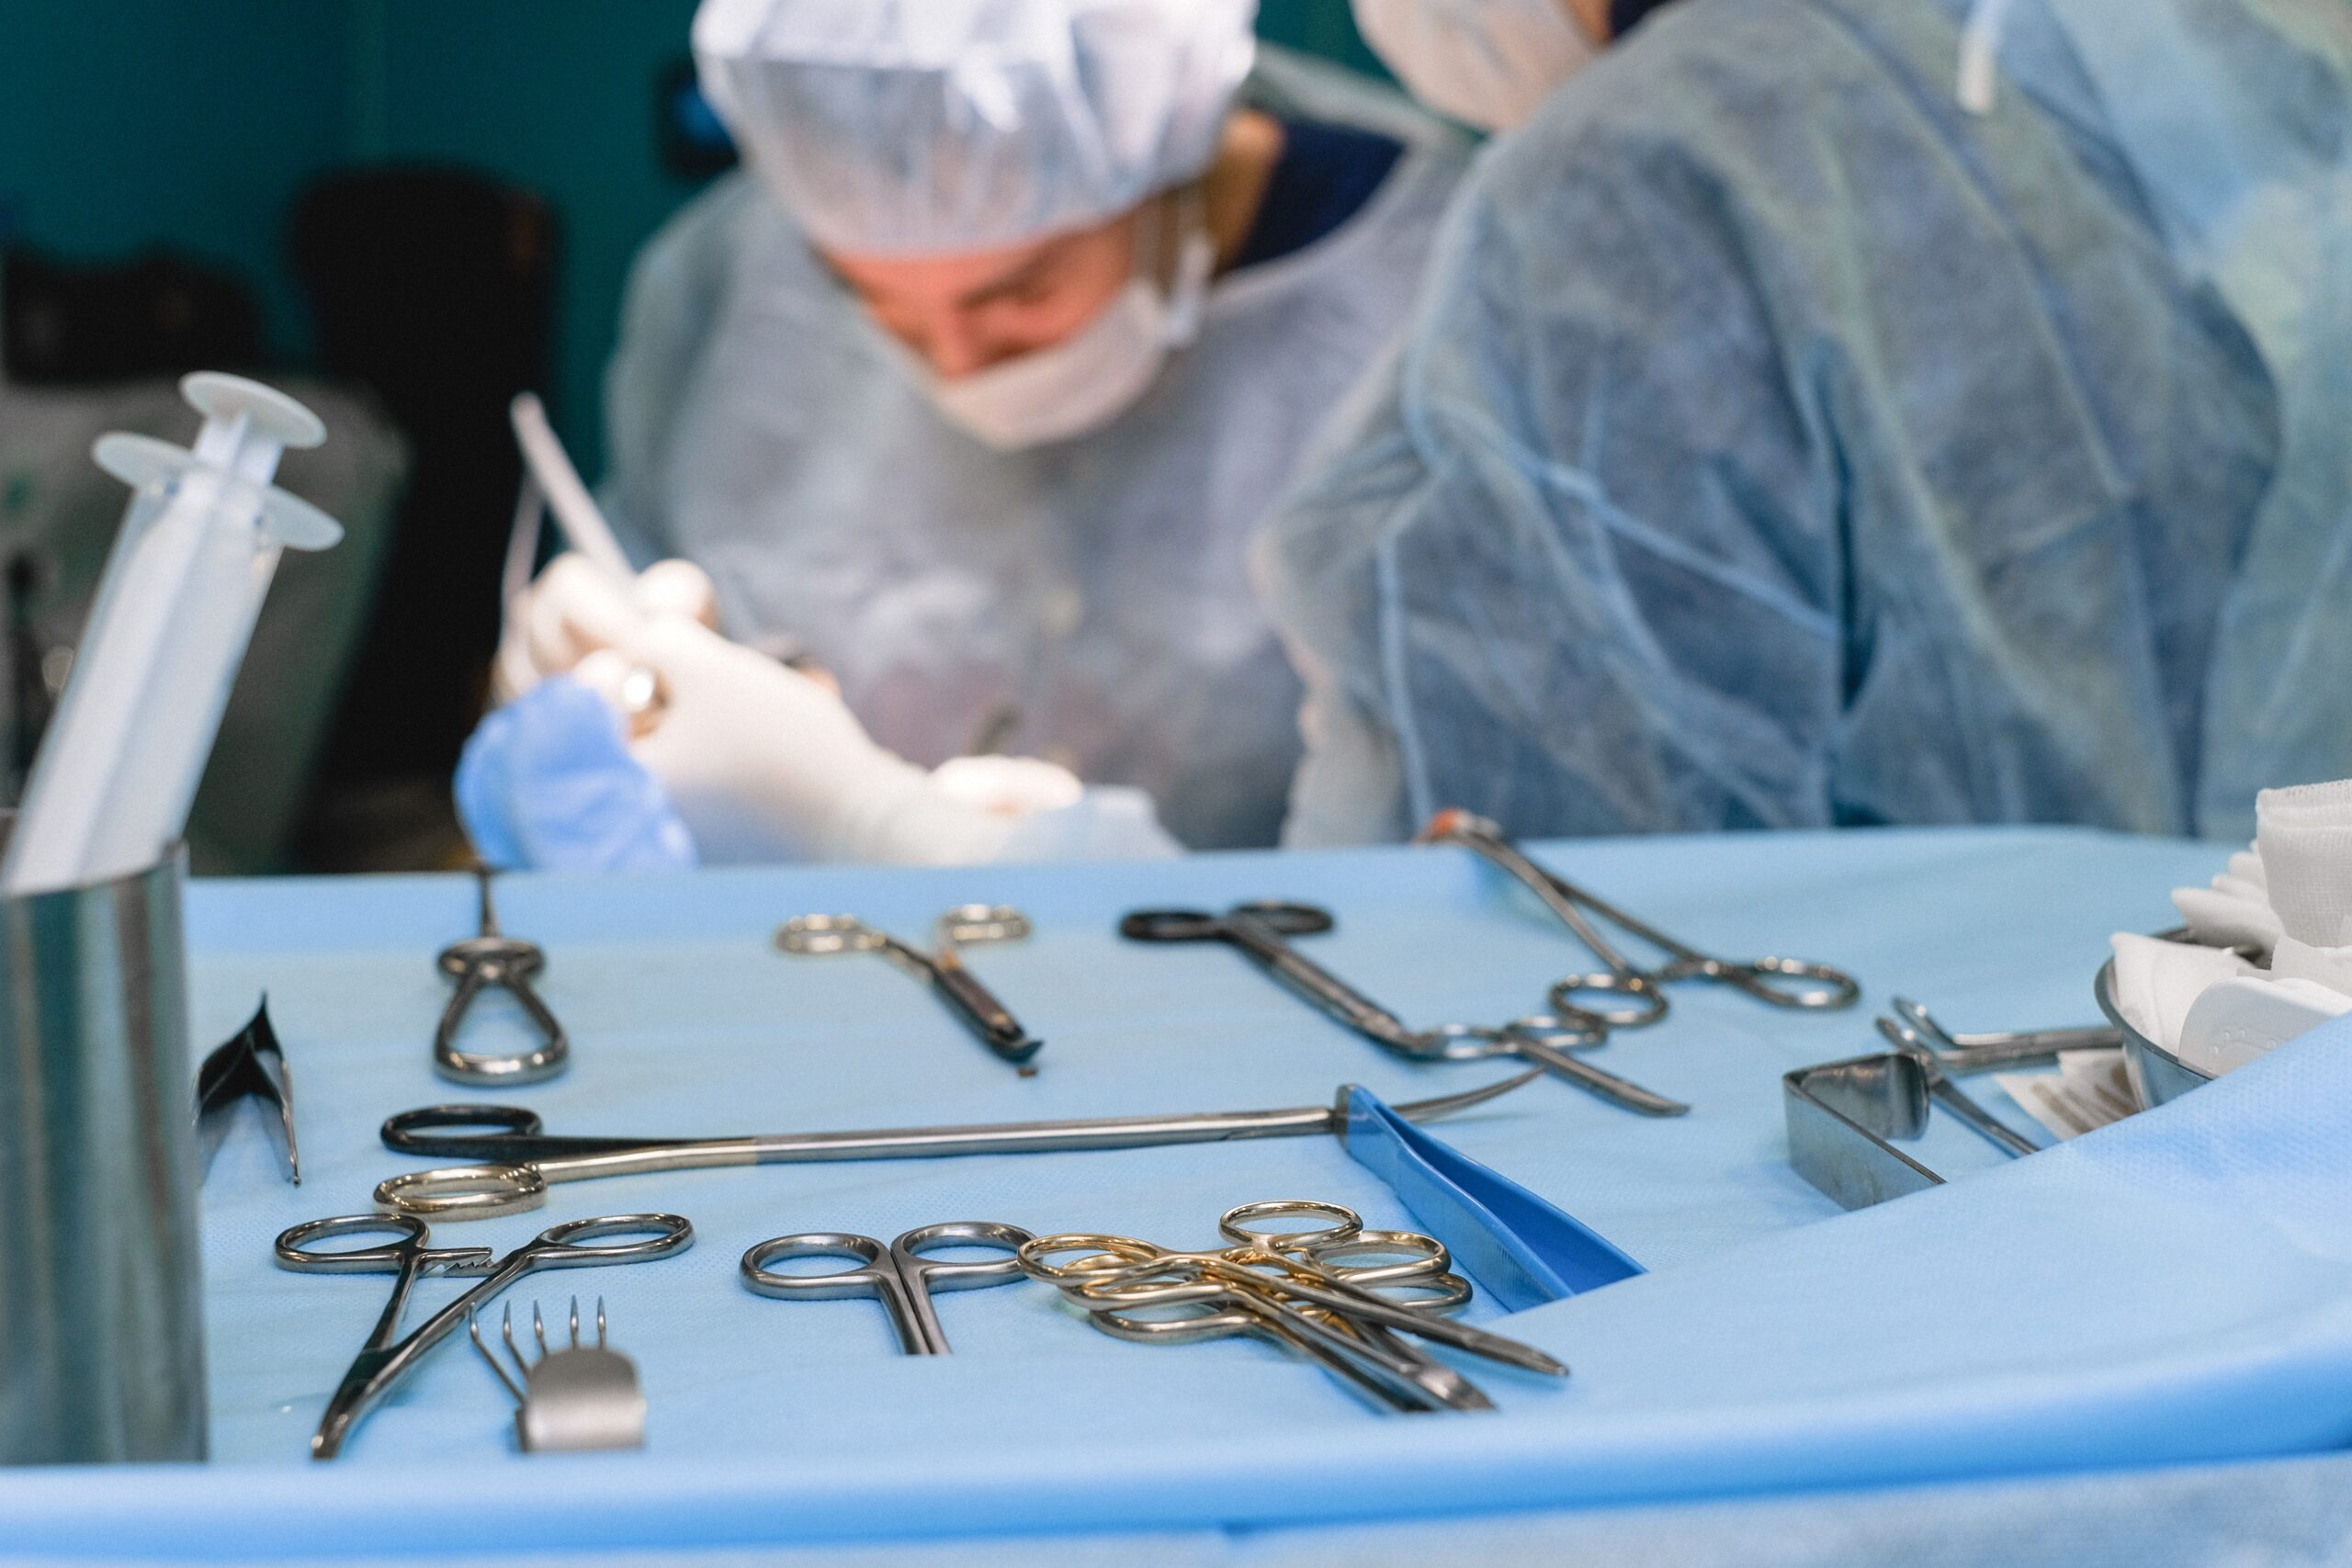 Medical Instruments and Surgeon Performing a Surgery